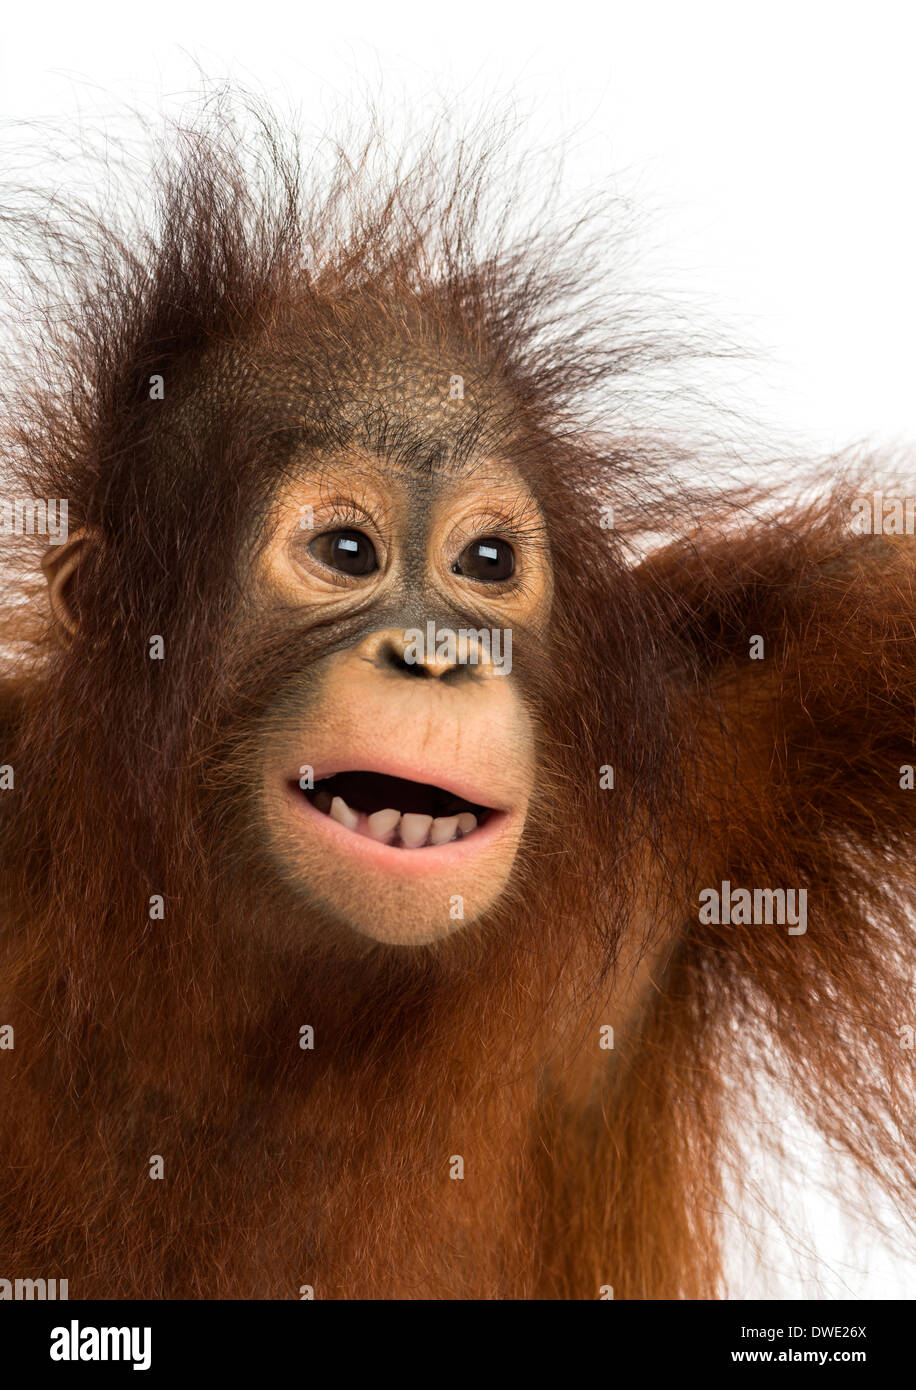 Close-up of a young Bornean orangutan, mouth opened, Pongo pygmaeus, 18 months old, against white background Stock Photo